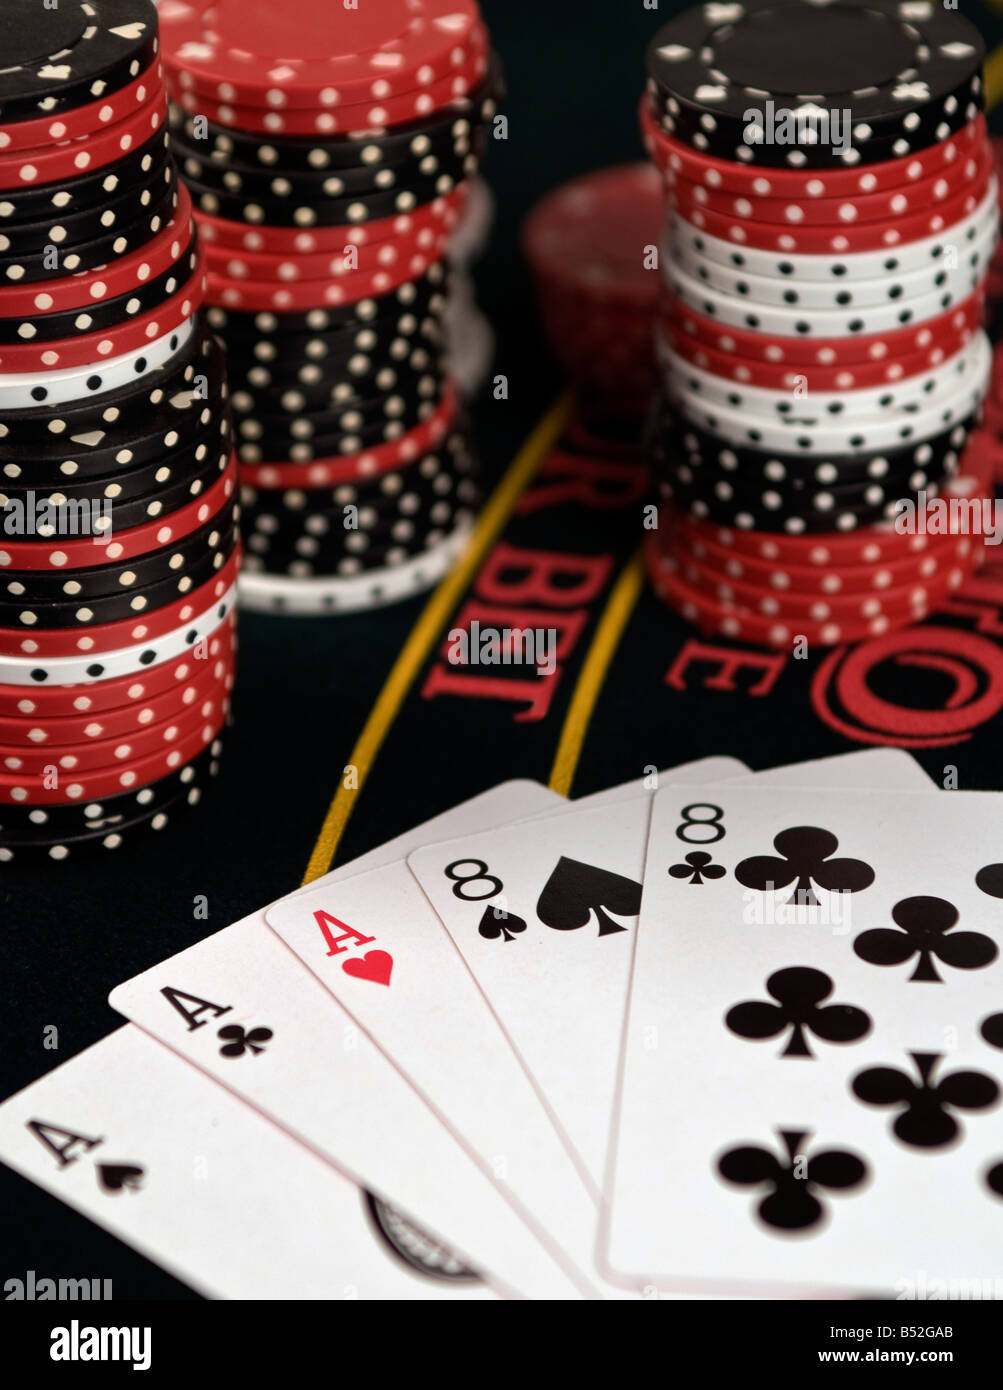 A still life of a winning poker hand, aces and eights. Stock Photo